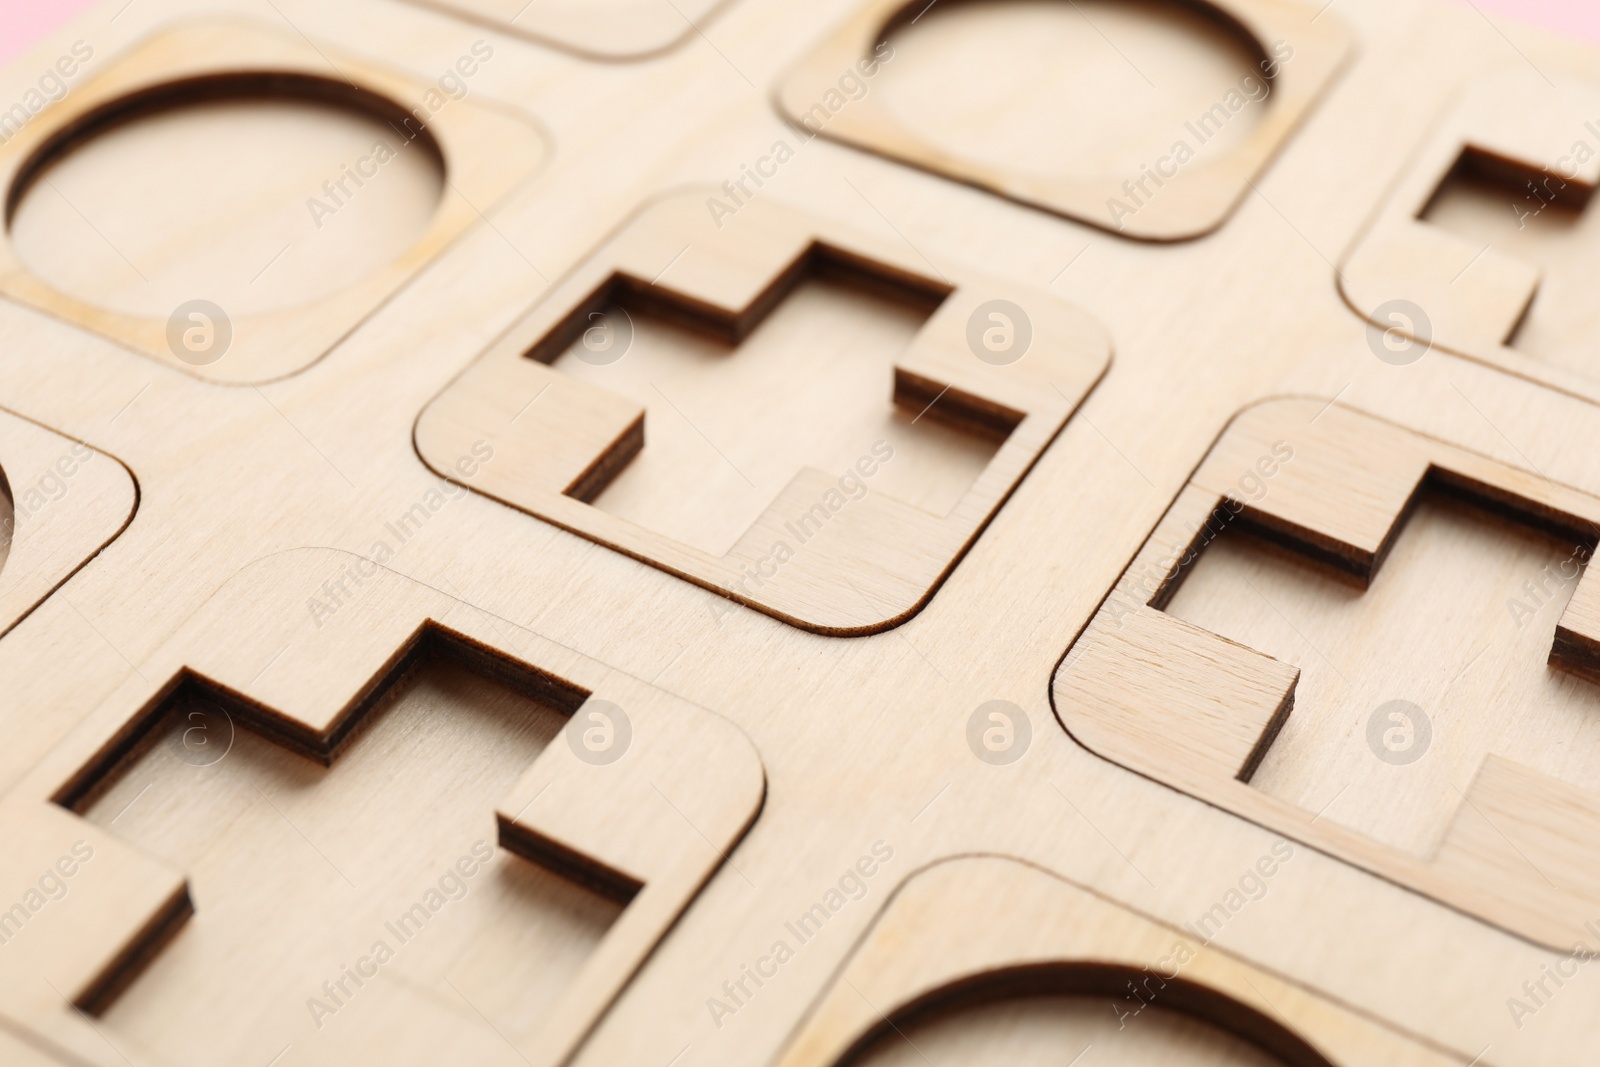 Photo of Tic tac toe wooden set as background, closeup